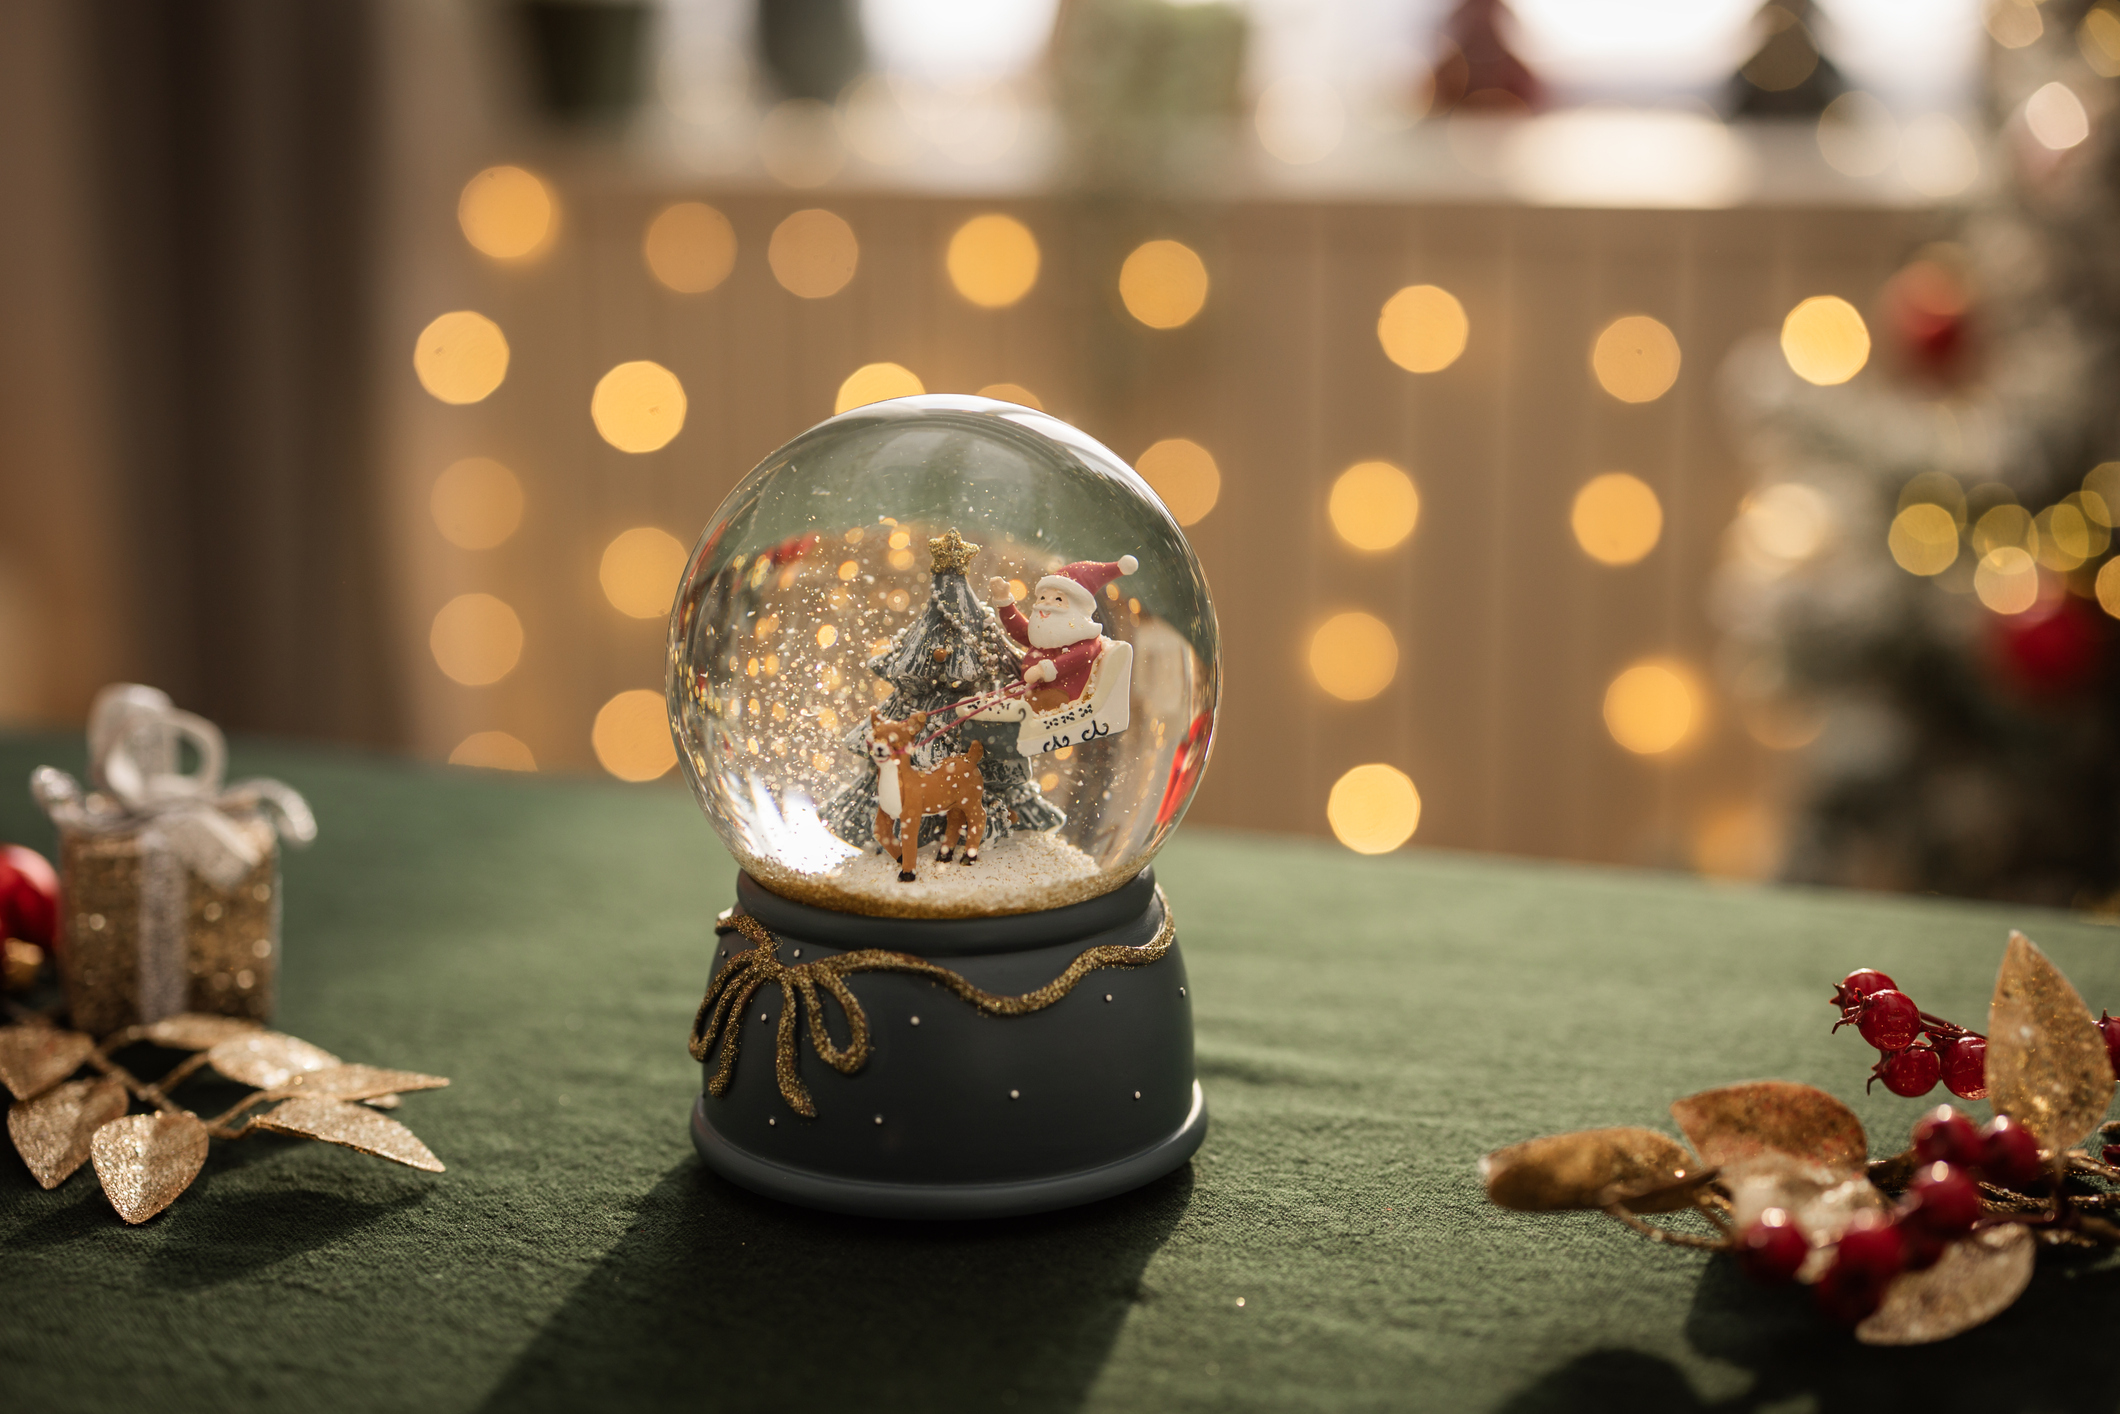 A snow globe sits on a green table with lights in the background. The snow globe has a green tree inside it with a star on top, a Santa, and a reindeer.